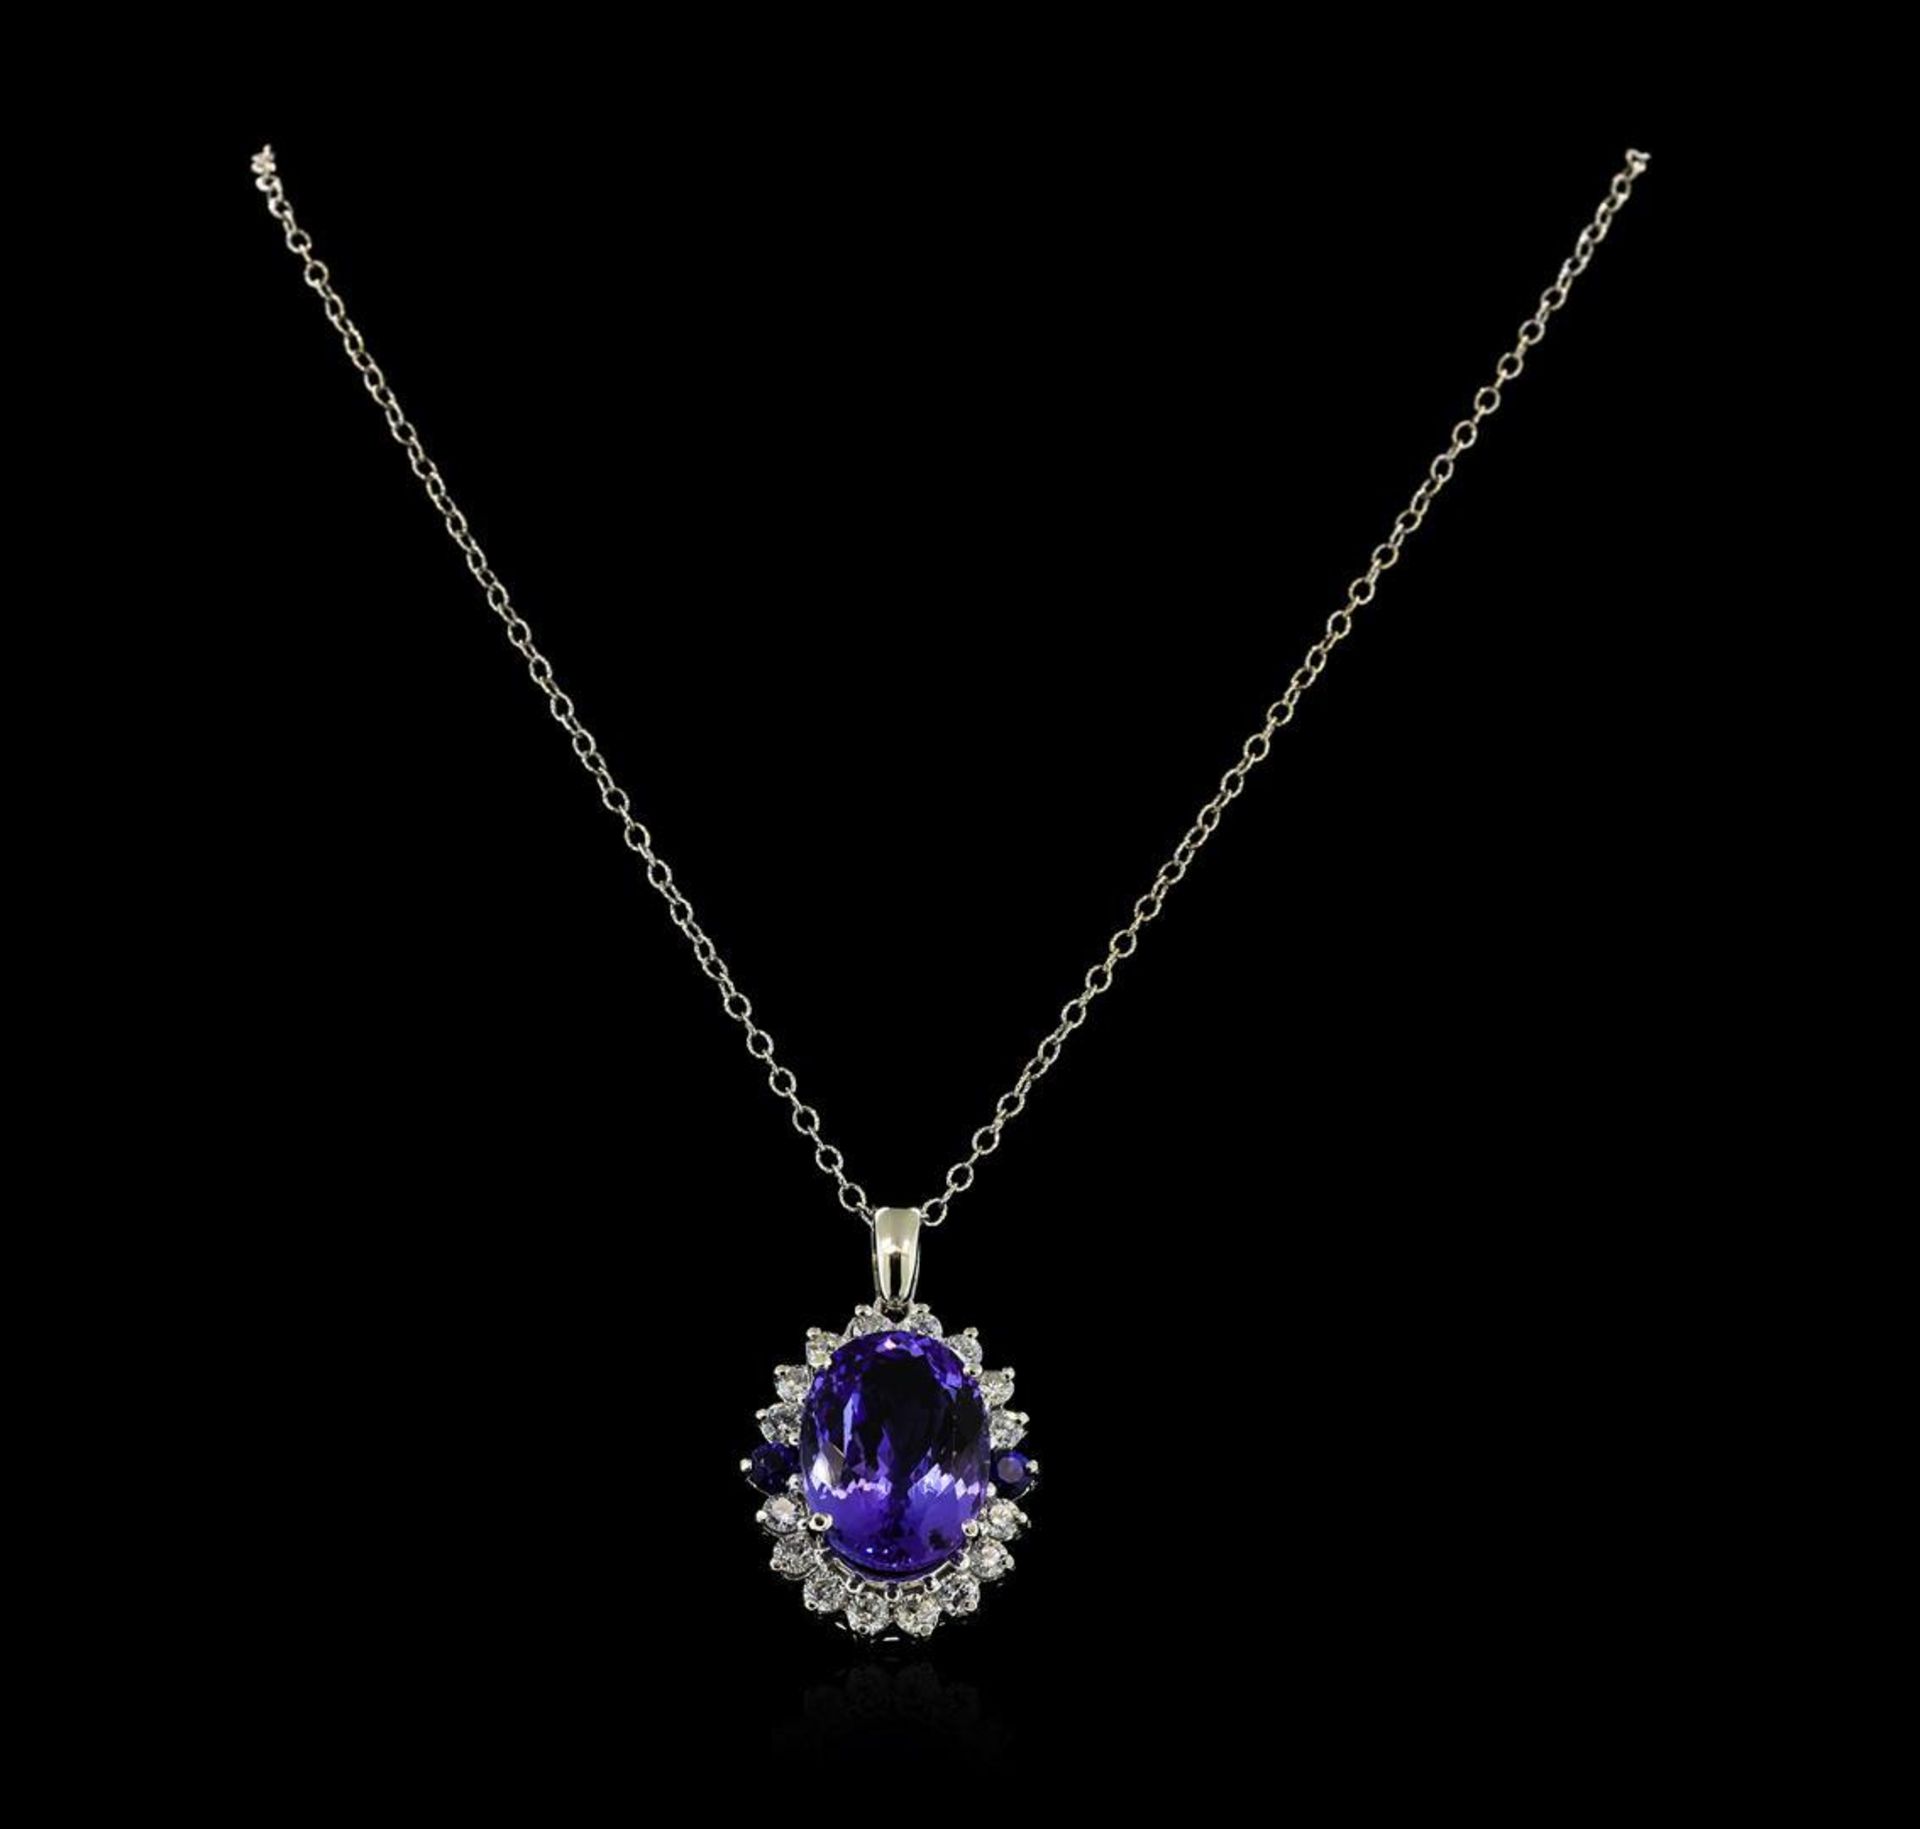 16.40 ctw Tanzanite, Sapphire, and Diamond Pendant With Chain - 14KT White Gold - Image 2 of 3